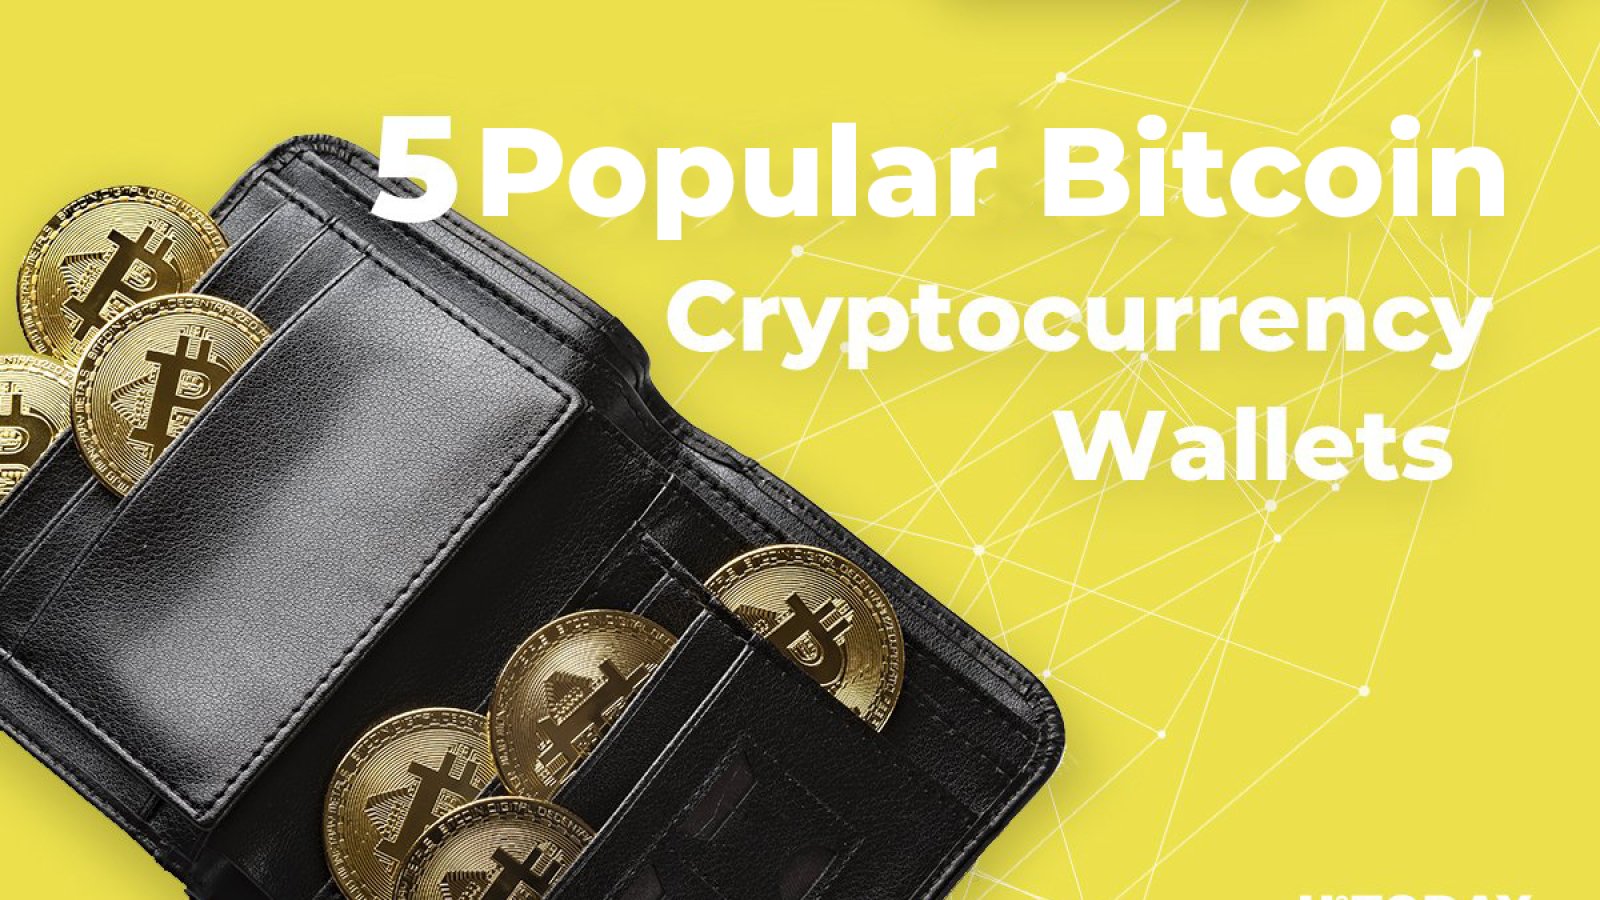 5 Popular Bitcoin and Cryptocurrency Wallets 2018